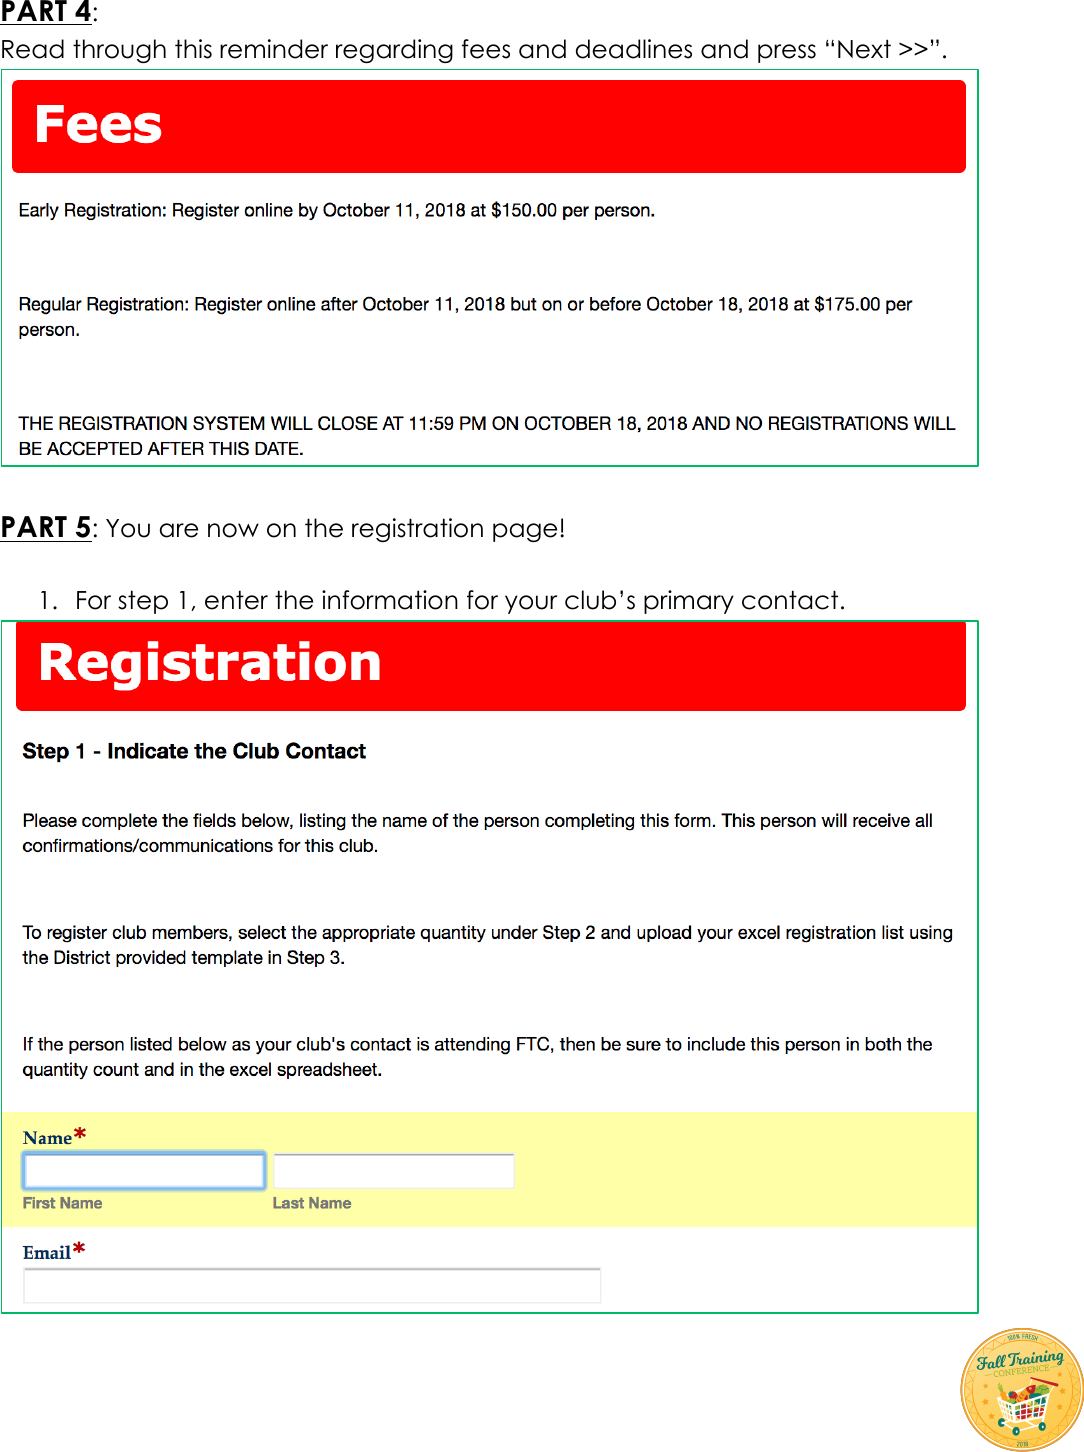 Page 6 of 12 - FTC2018 Registration Guide